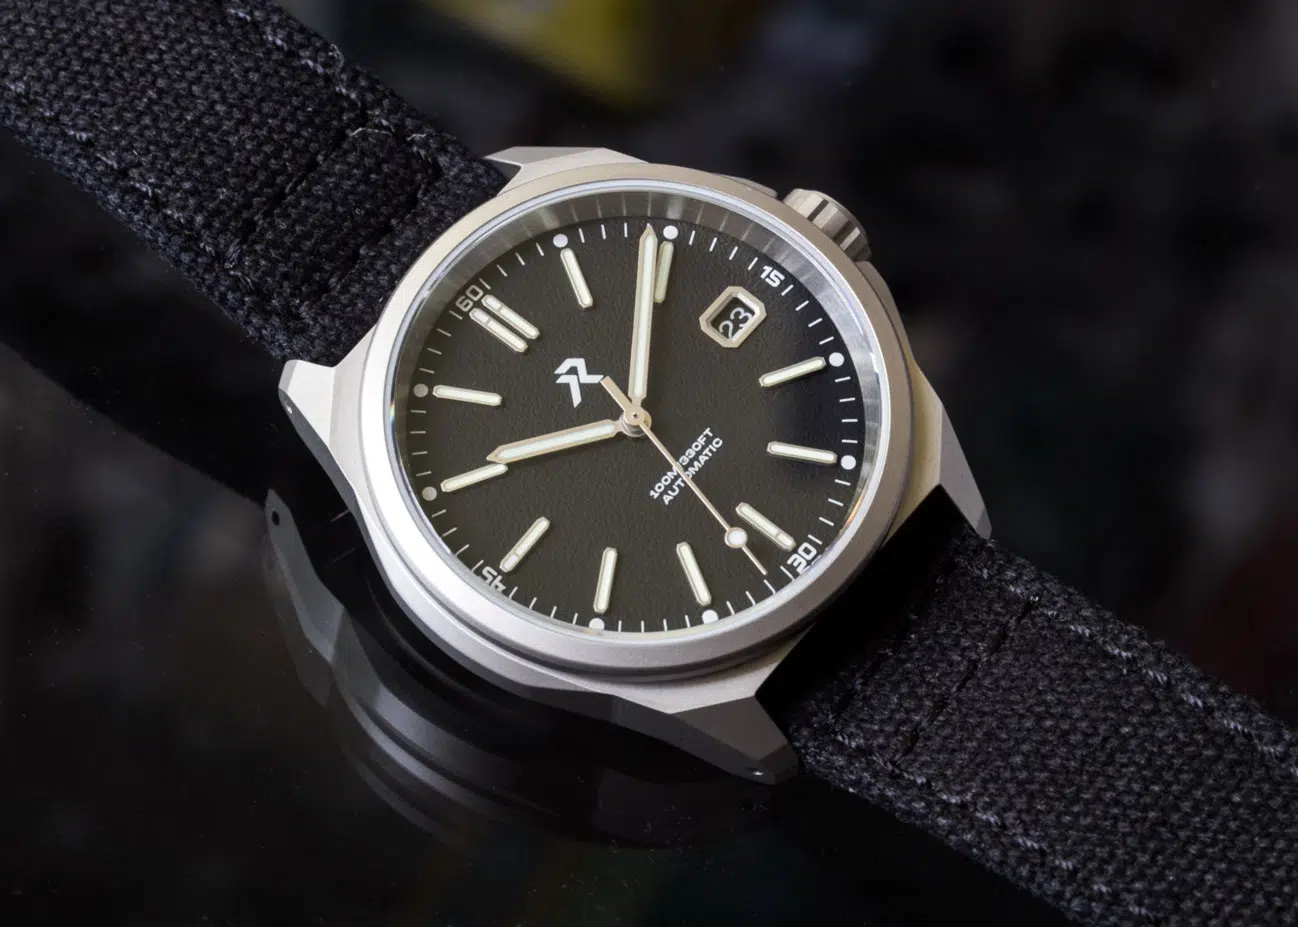 Rze Resolute dial